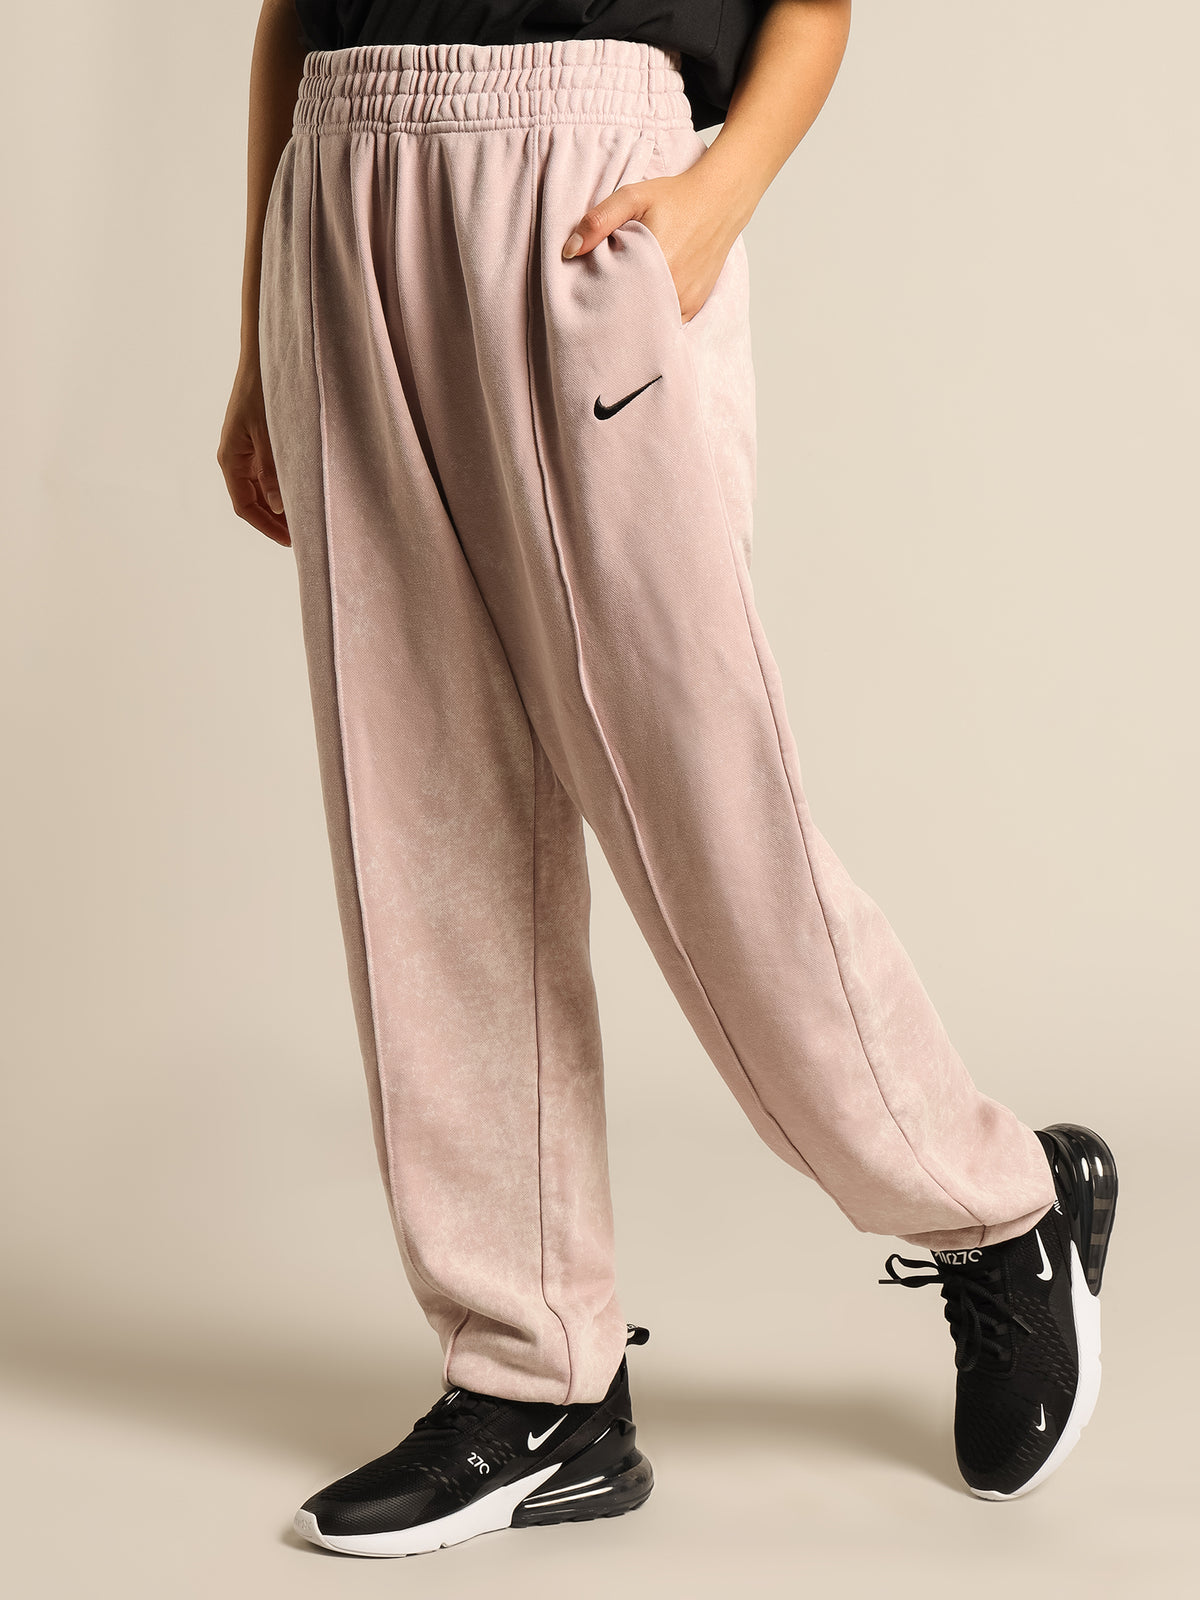 NSW Essential Fleece Track Pants in Champagne